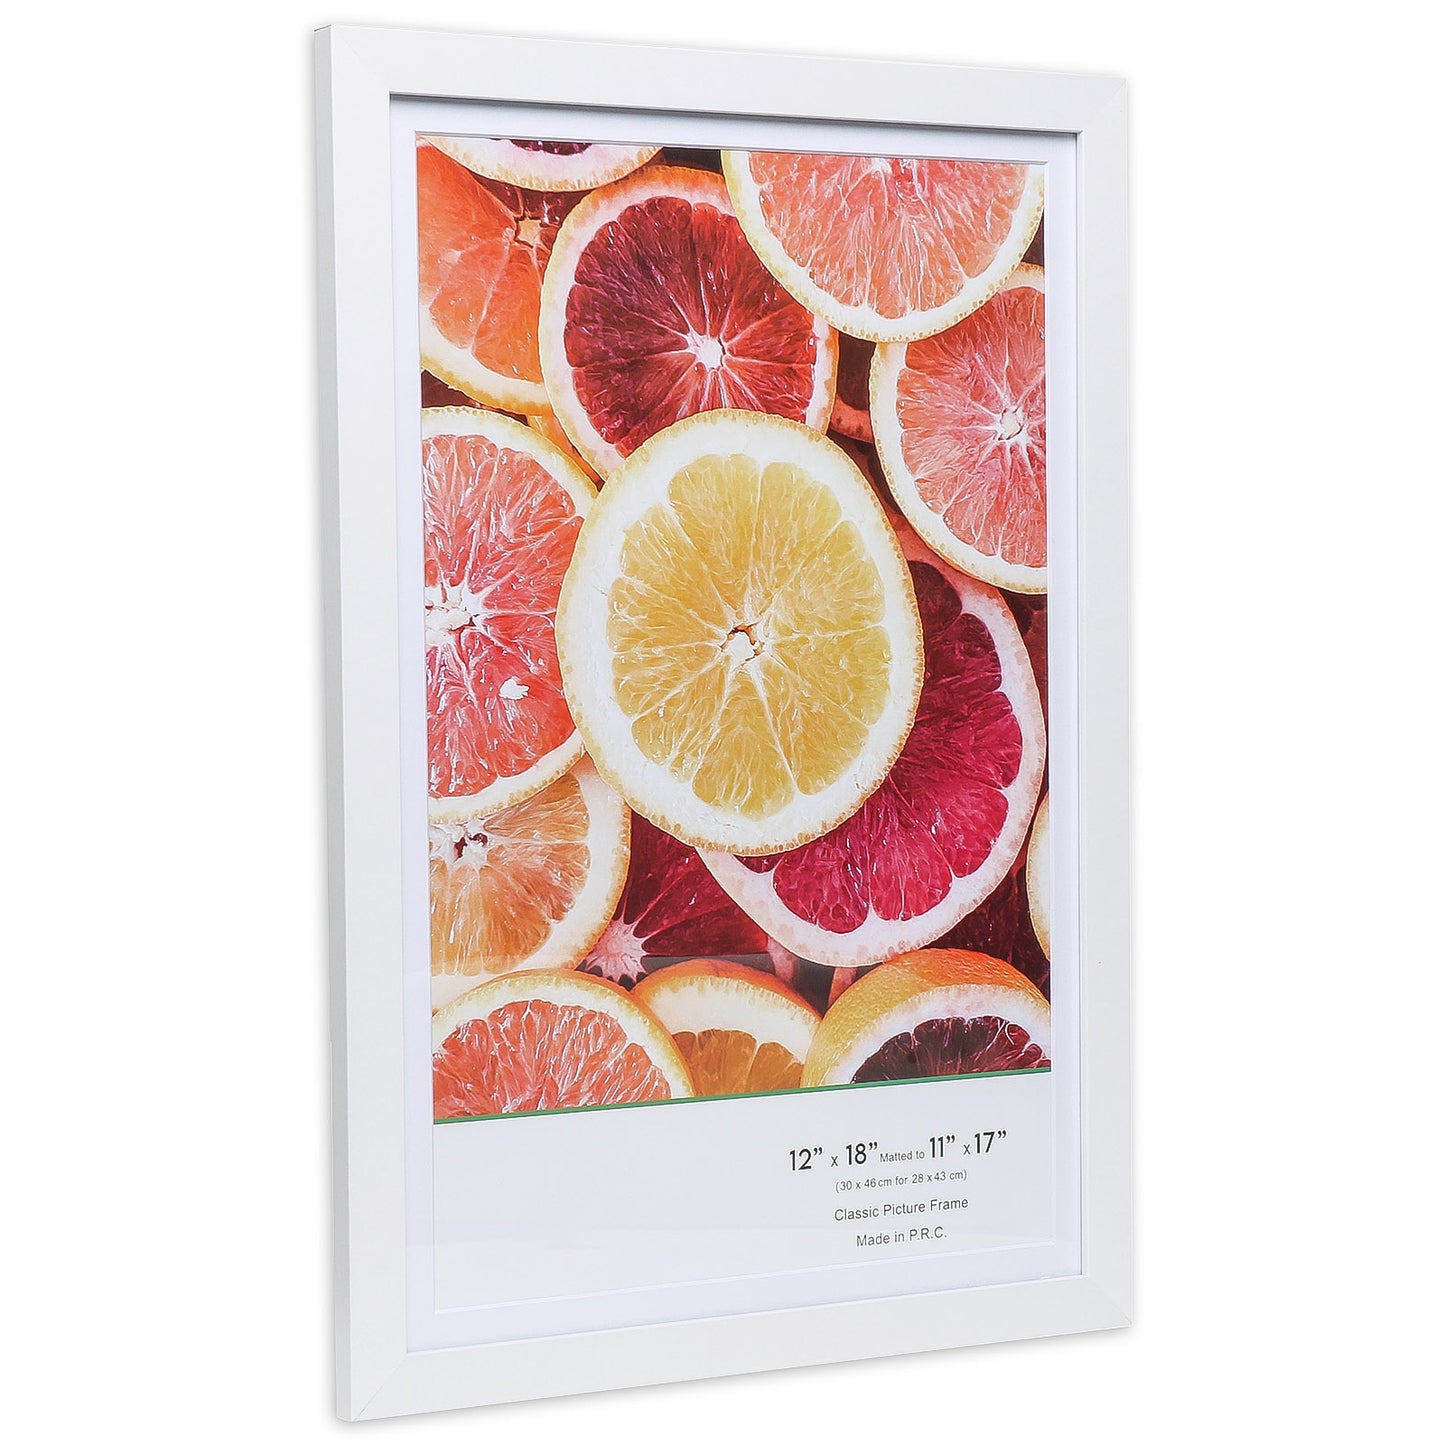 12" x 18” Classic White MDF Wood Picture Frame with Tempered Glass, 11" x 17" Matted